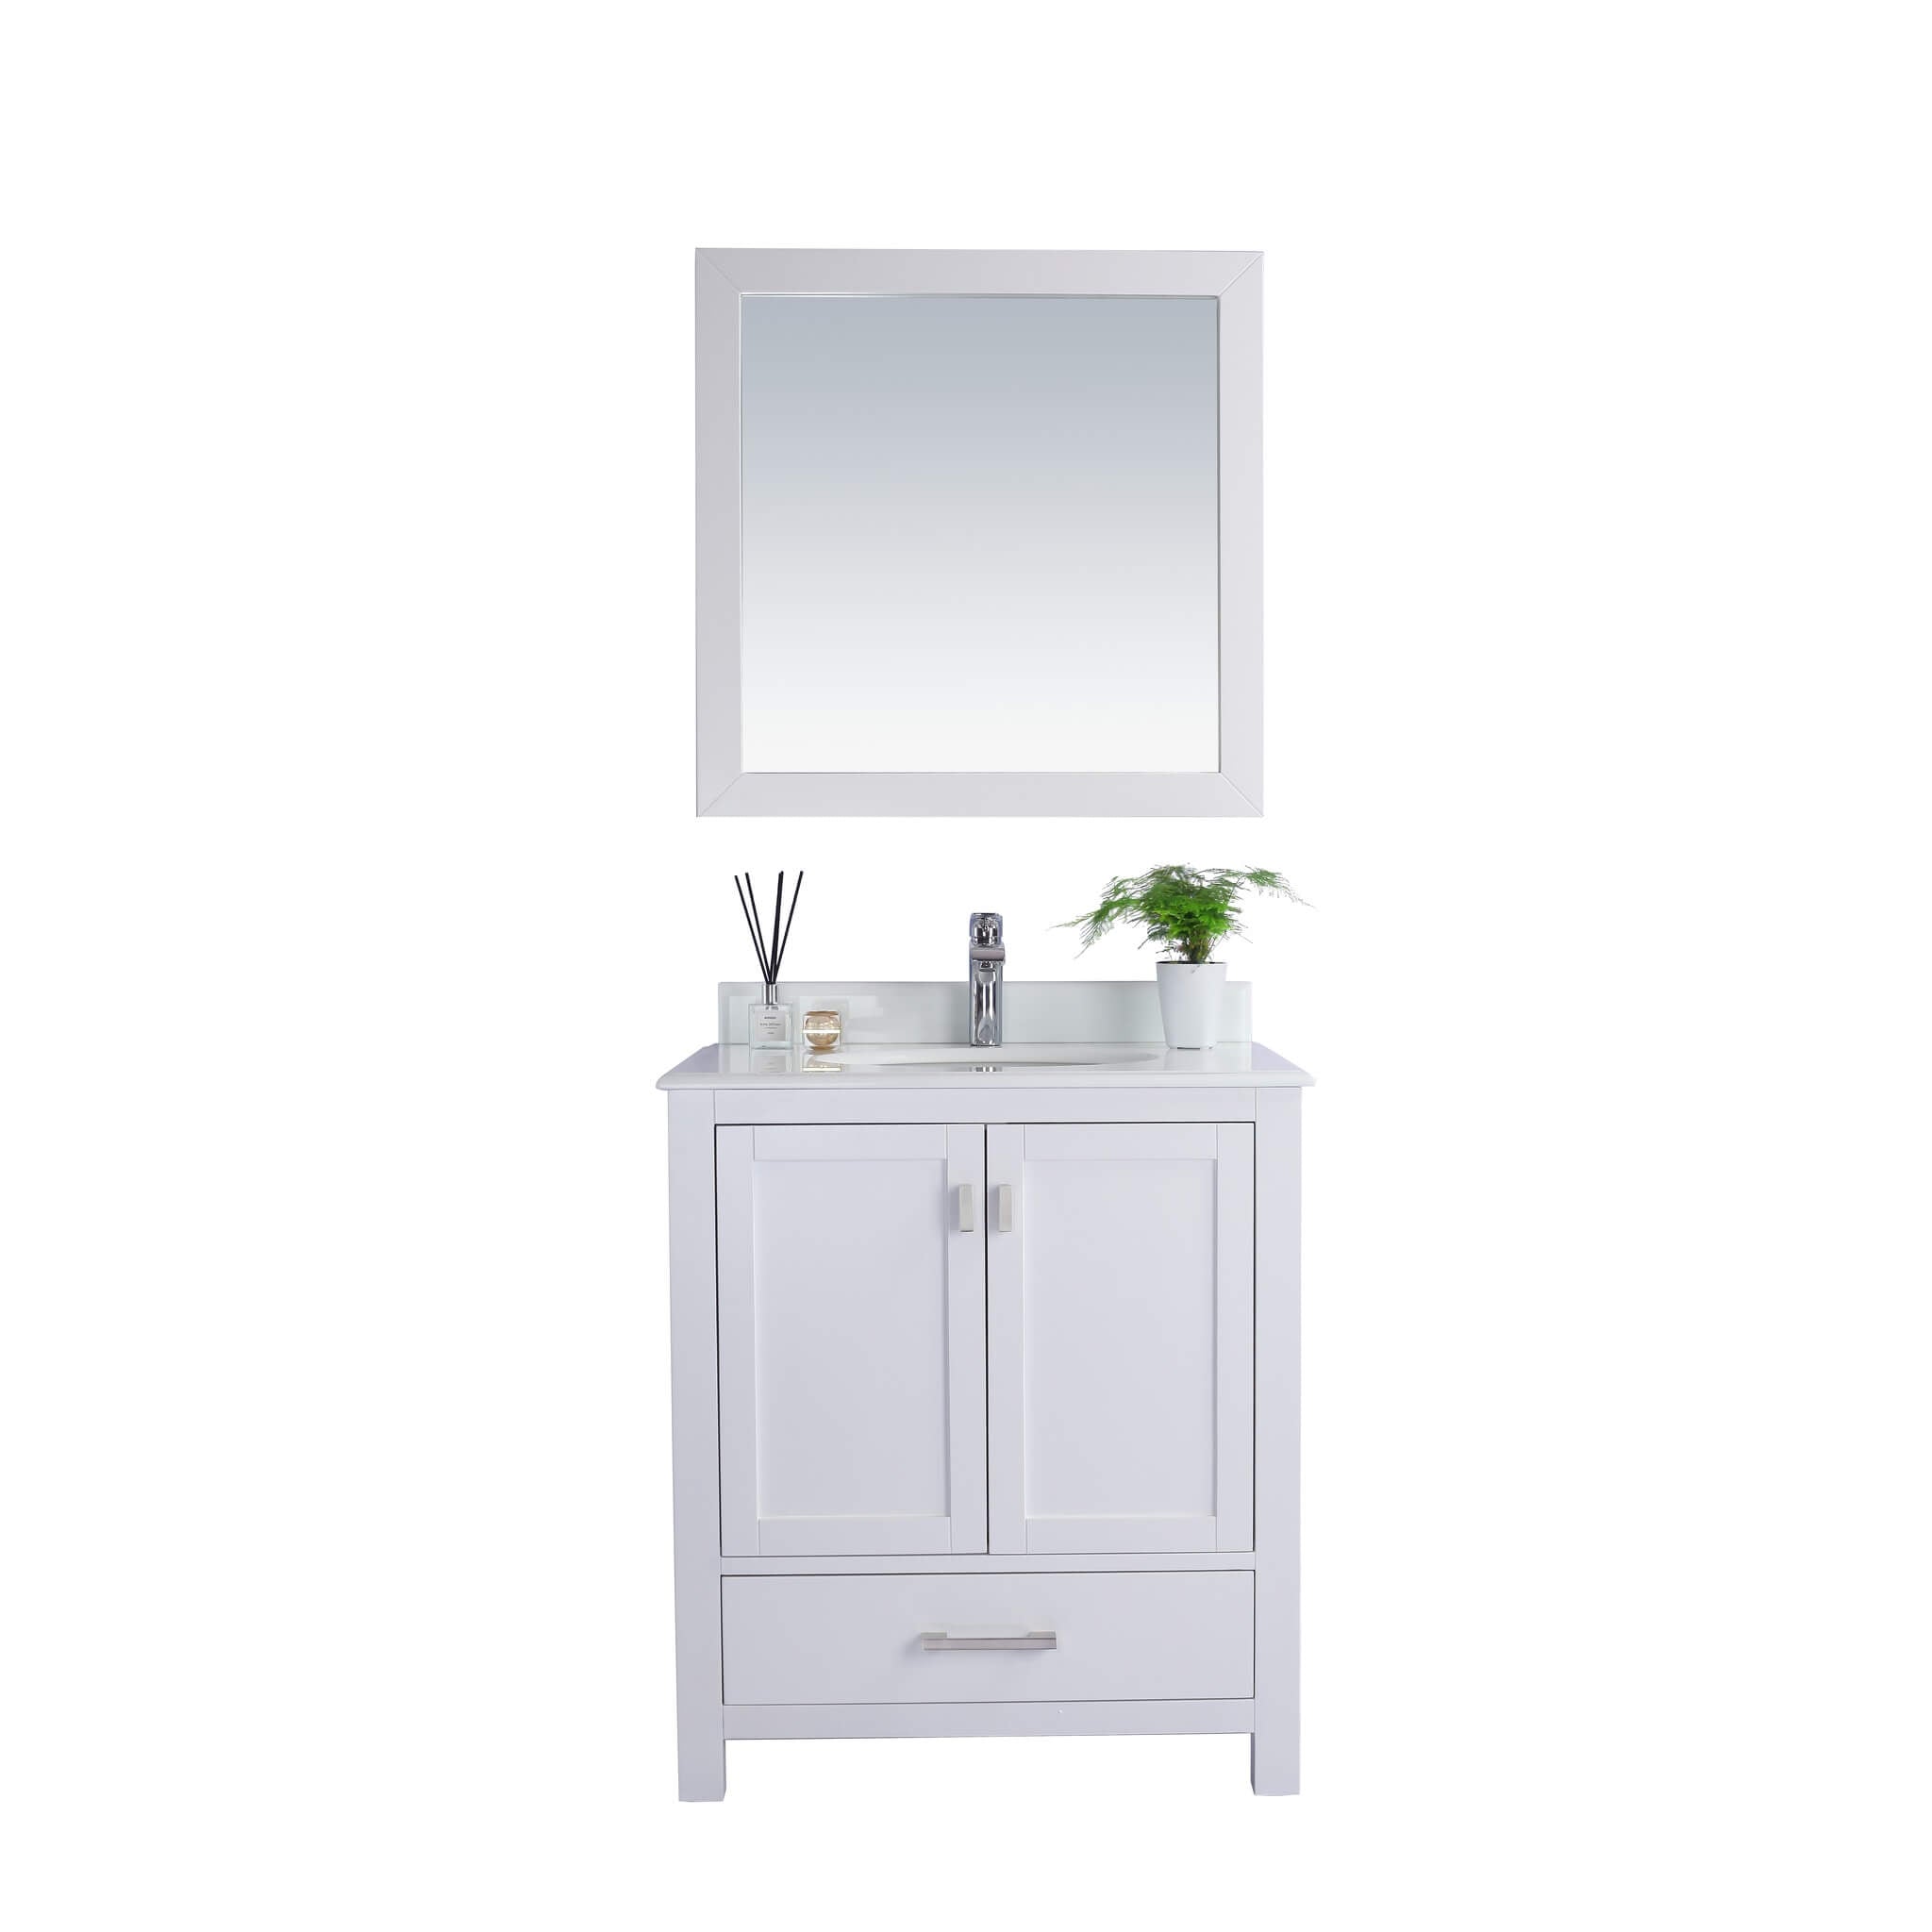 LAVIVA Wilson 313ANG-30W-PW 30" Single Bathroom Vanity in White with Pure White Phoenix Stone, White Oval Sink, Front View